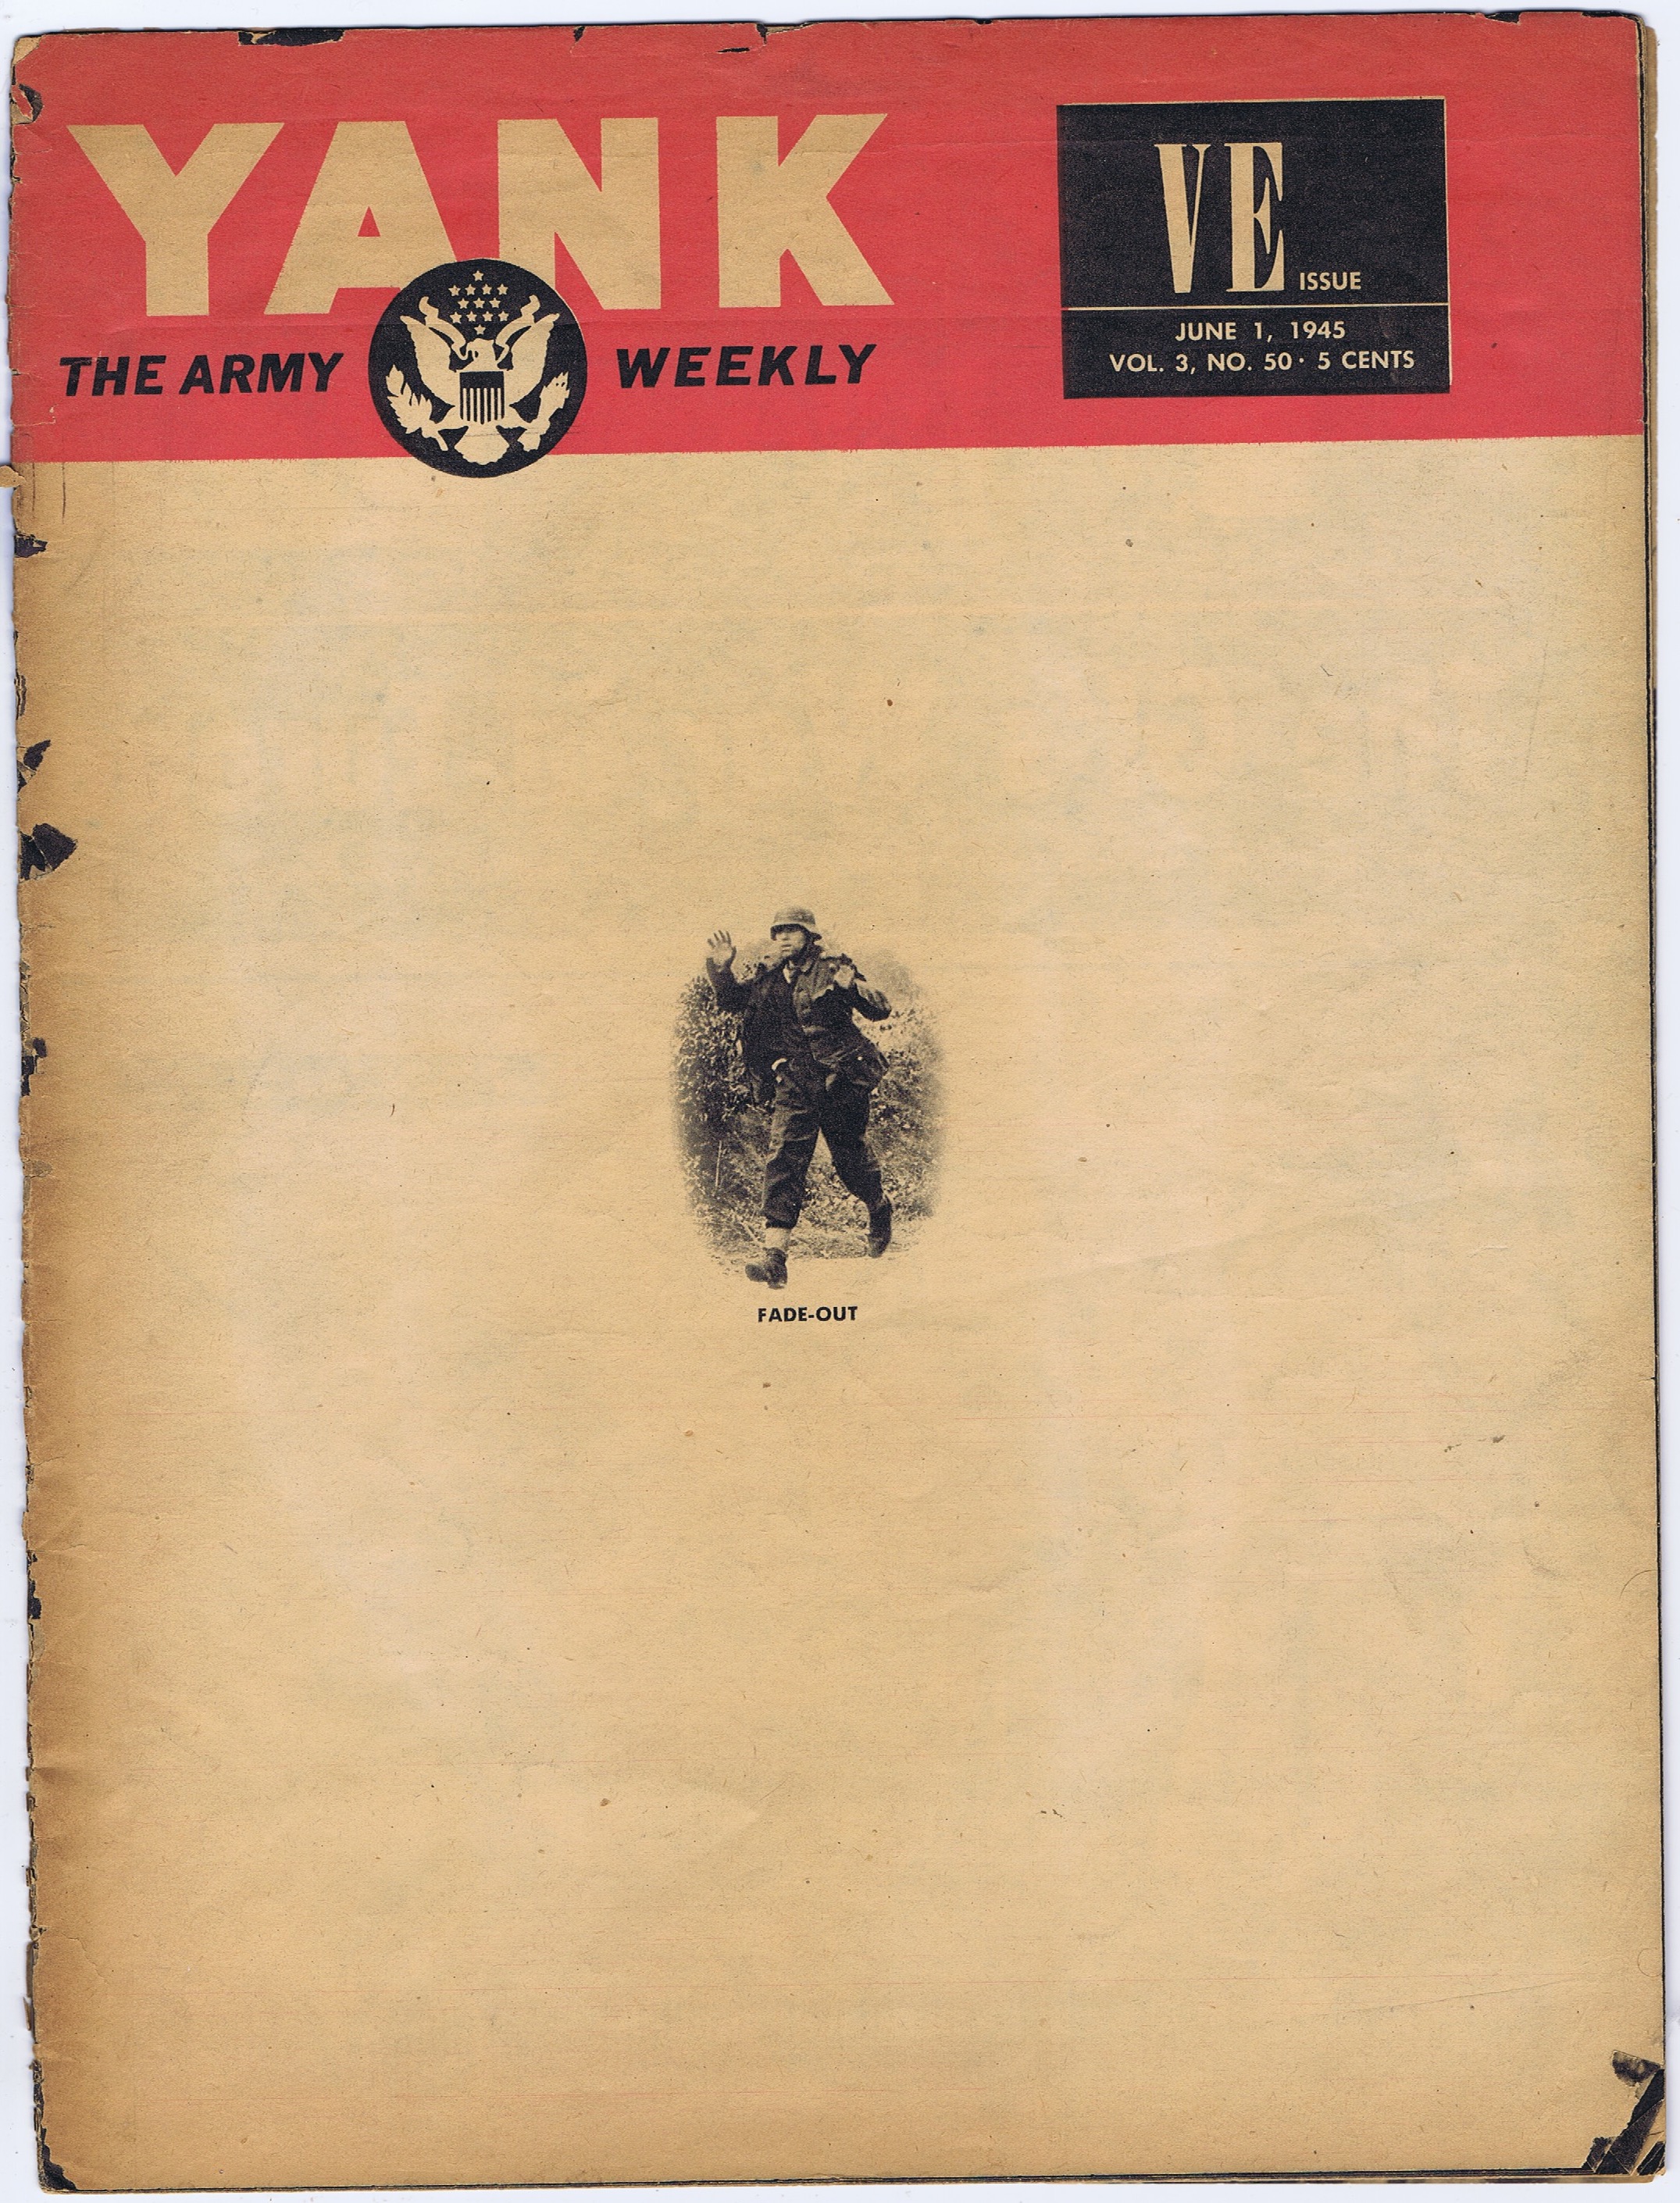 J217	YANK, THE ARMY WEEKLY VE ISSUE JUNE 1, 1945